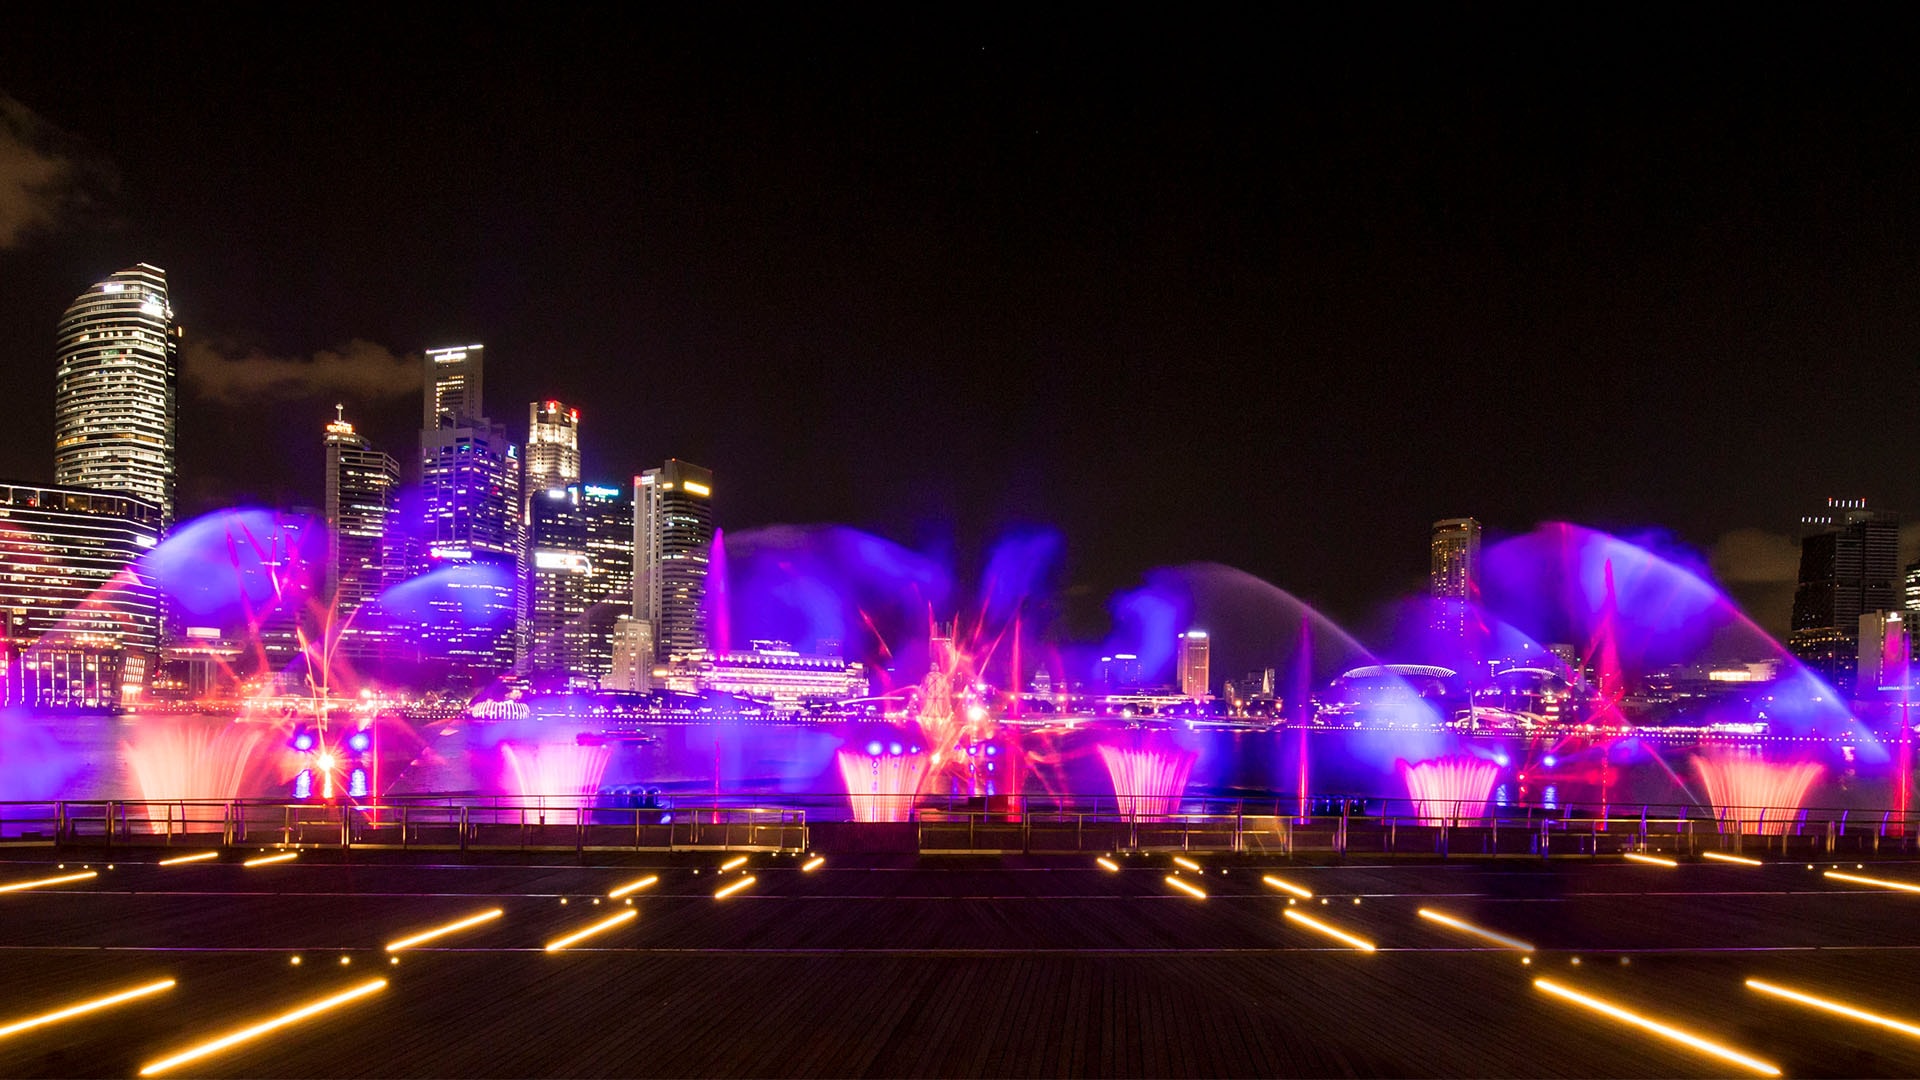 A daily free light and water show, right in front of Marina Bay Sands